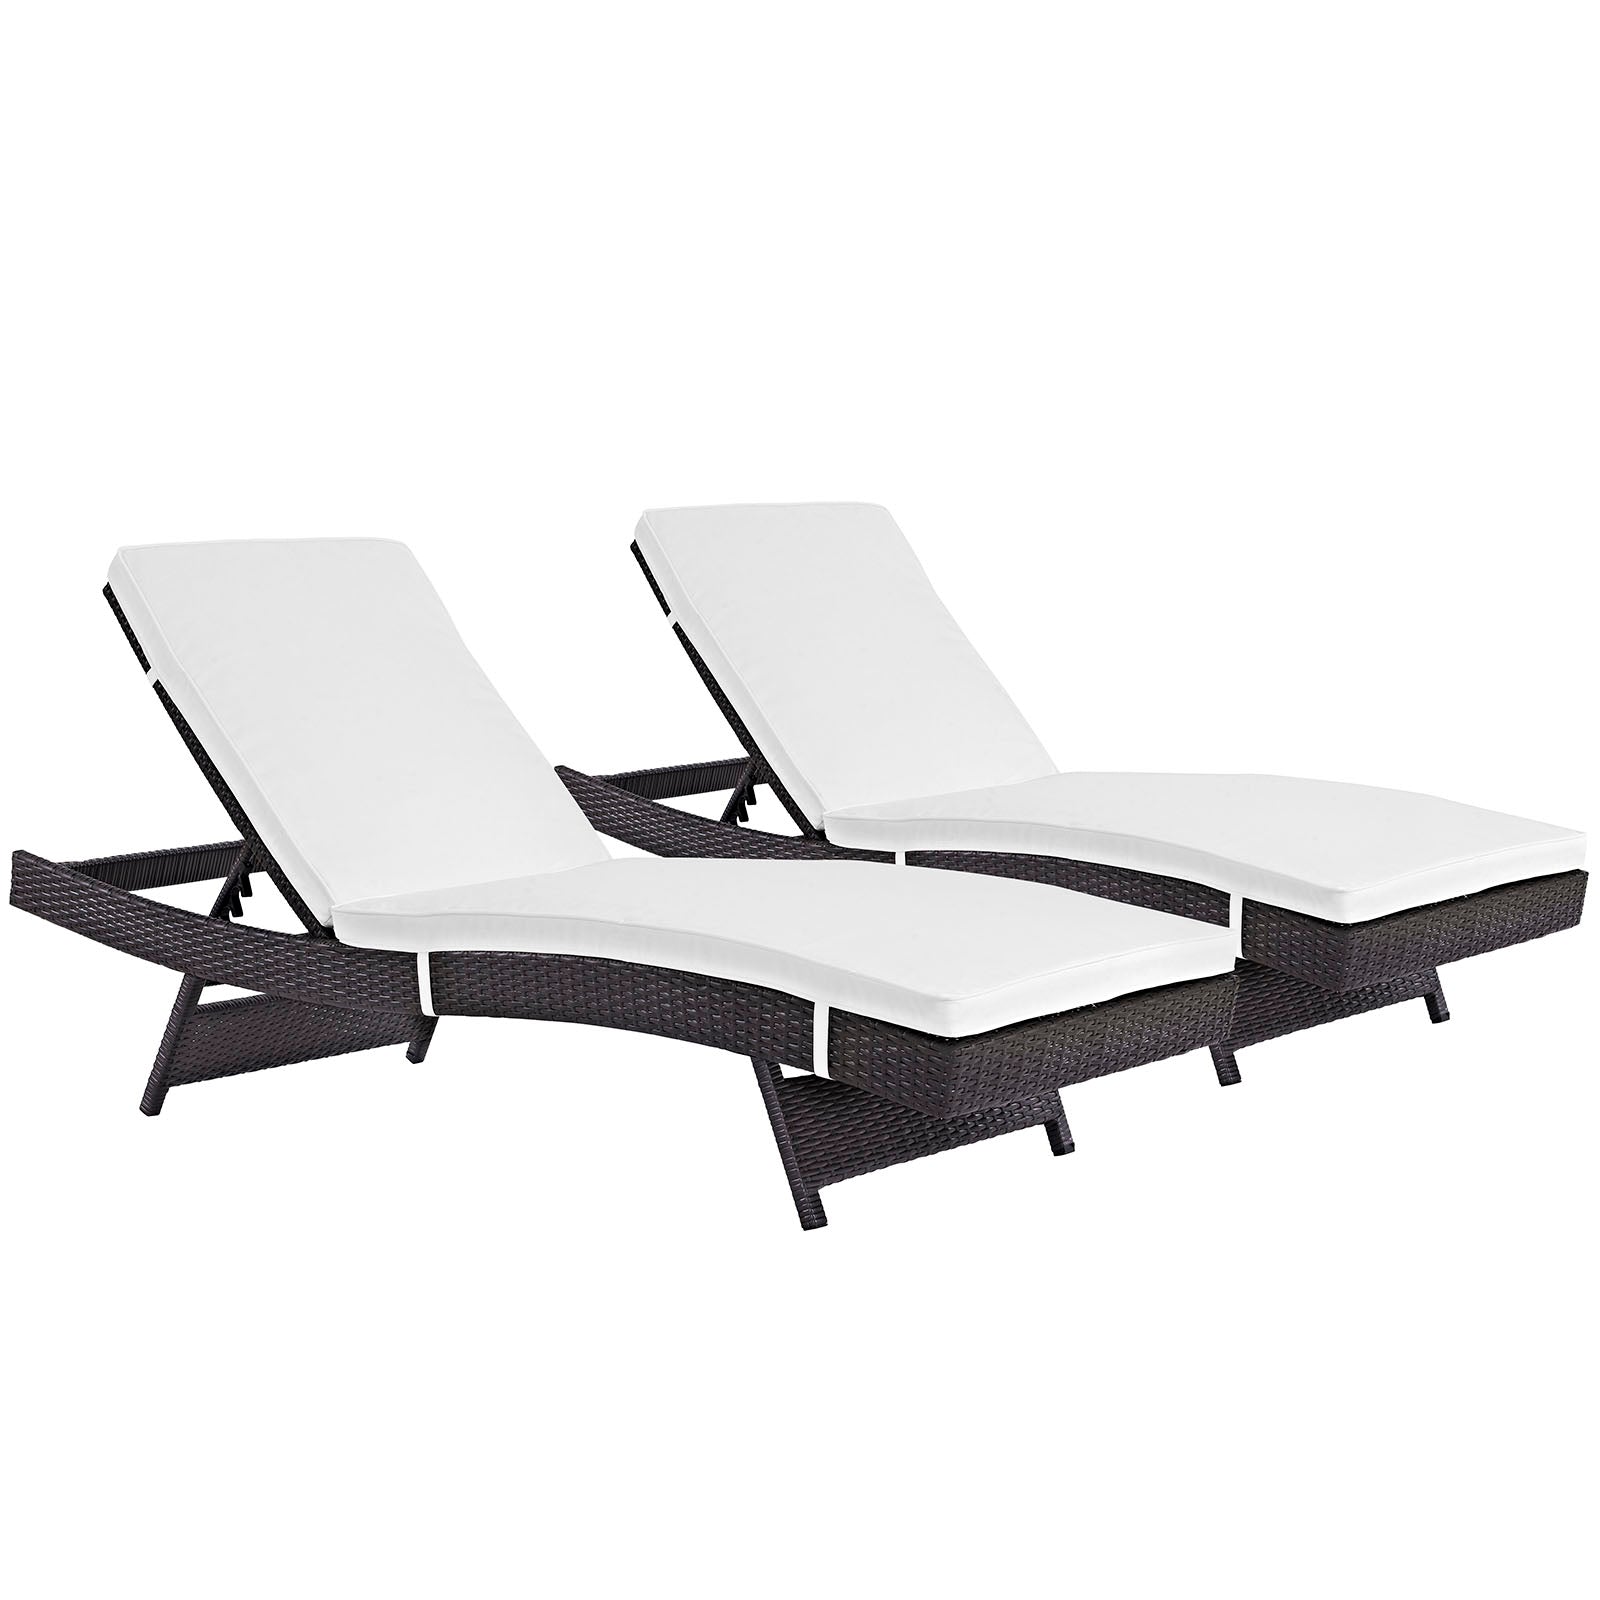 Modway Outdoor Loungers - Convene Chaise Outdoor Patio Set Espresso & White (Set of 2)